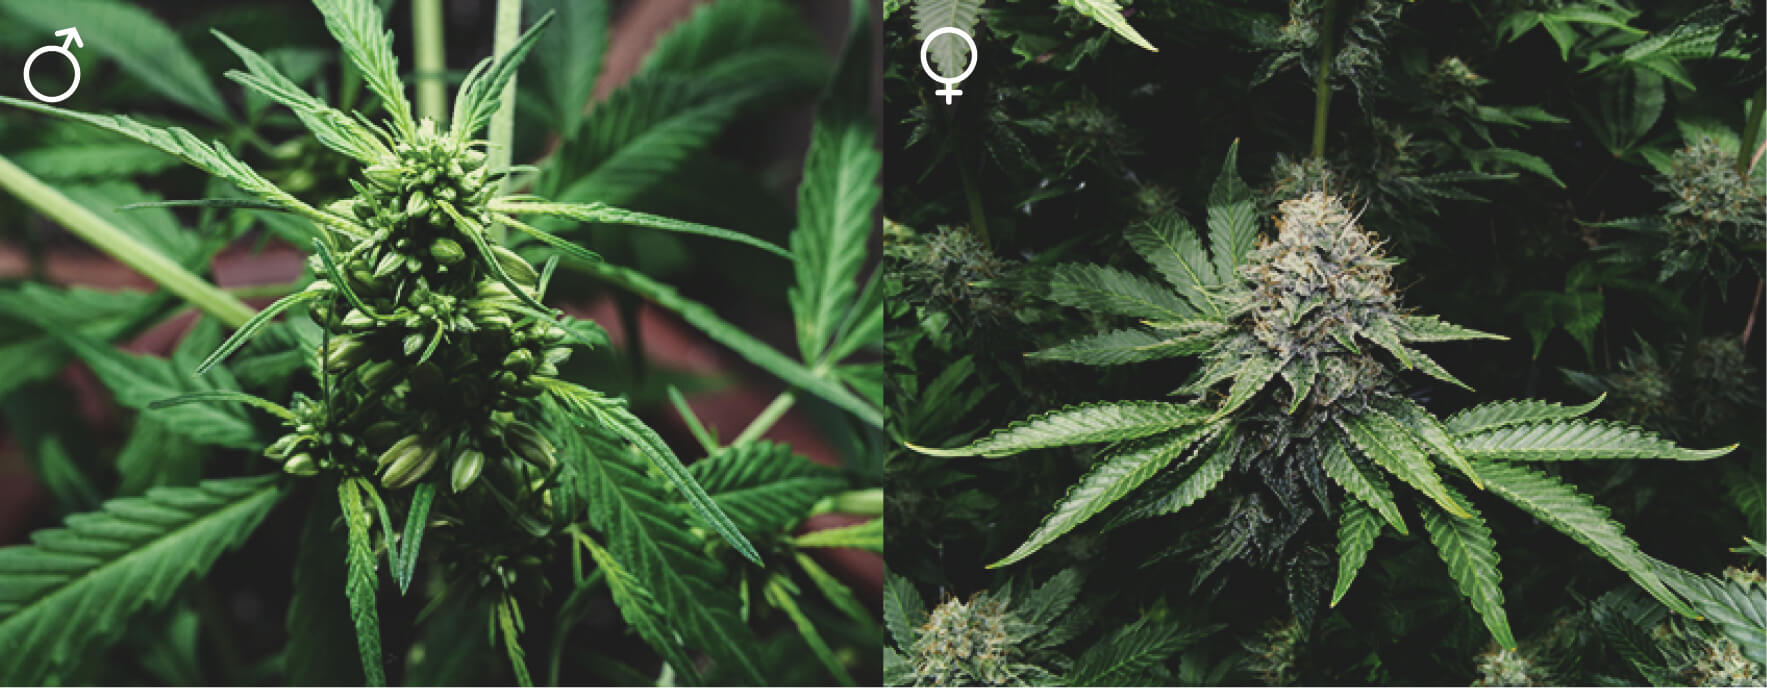 Are All Cannabis Plants the Same?